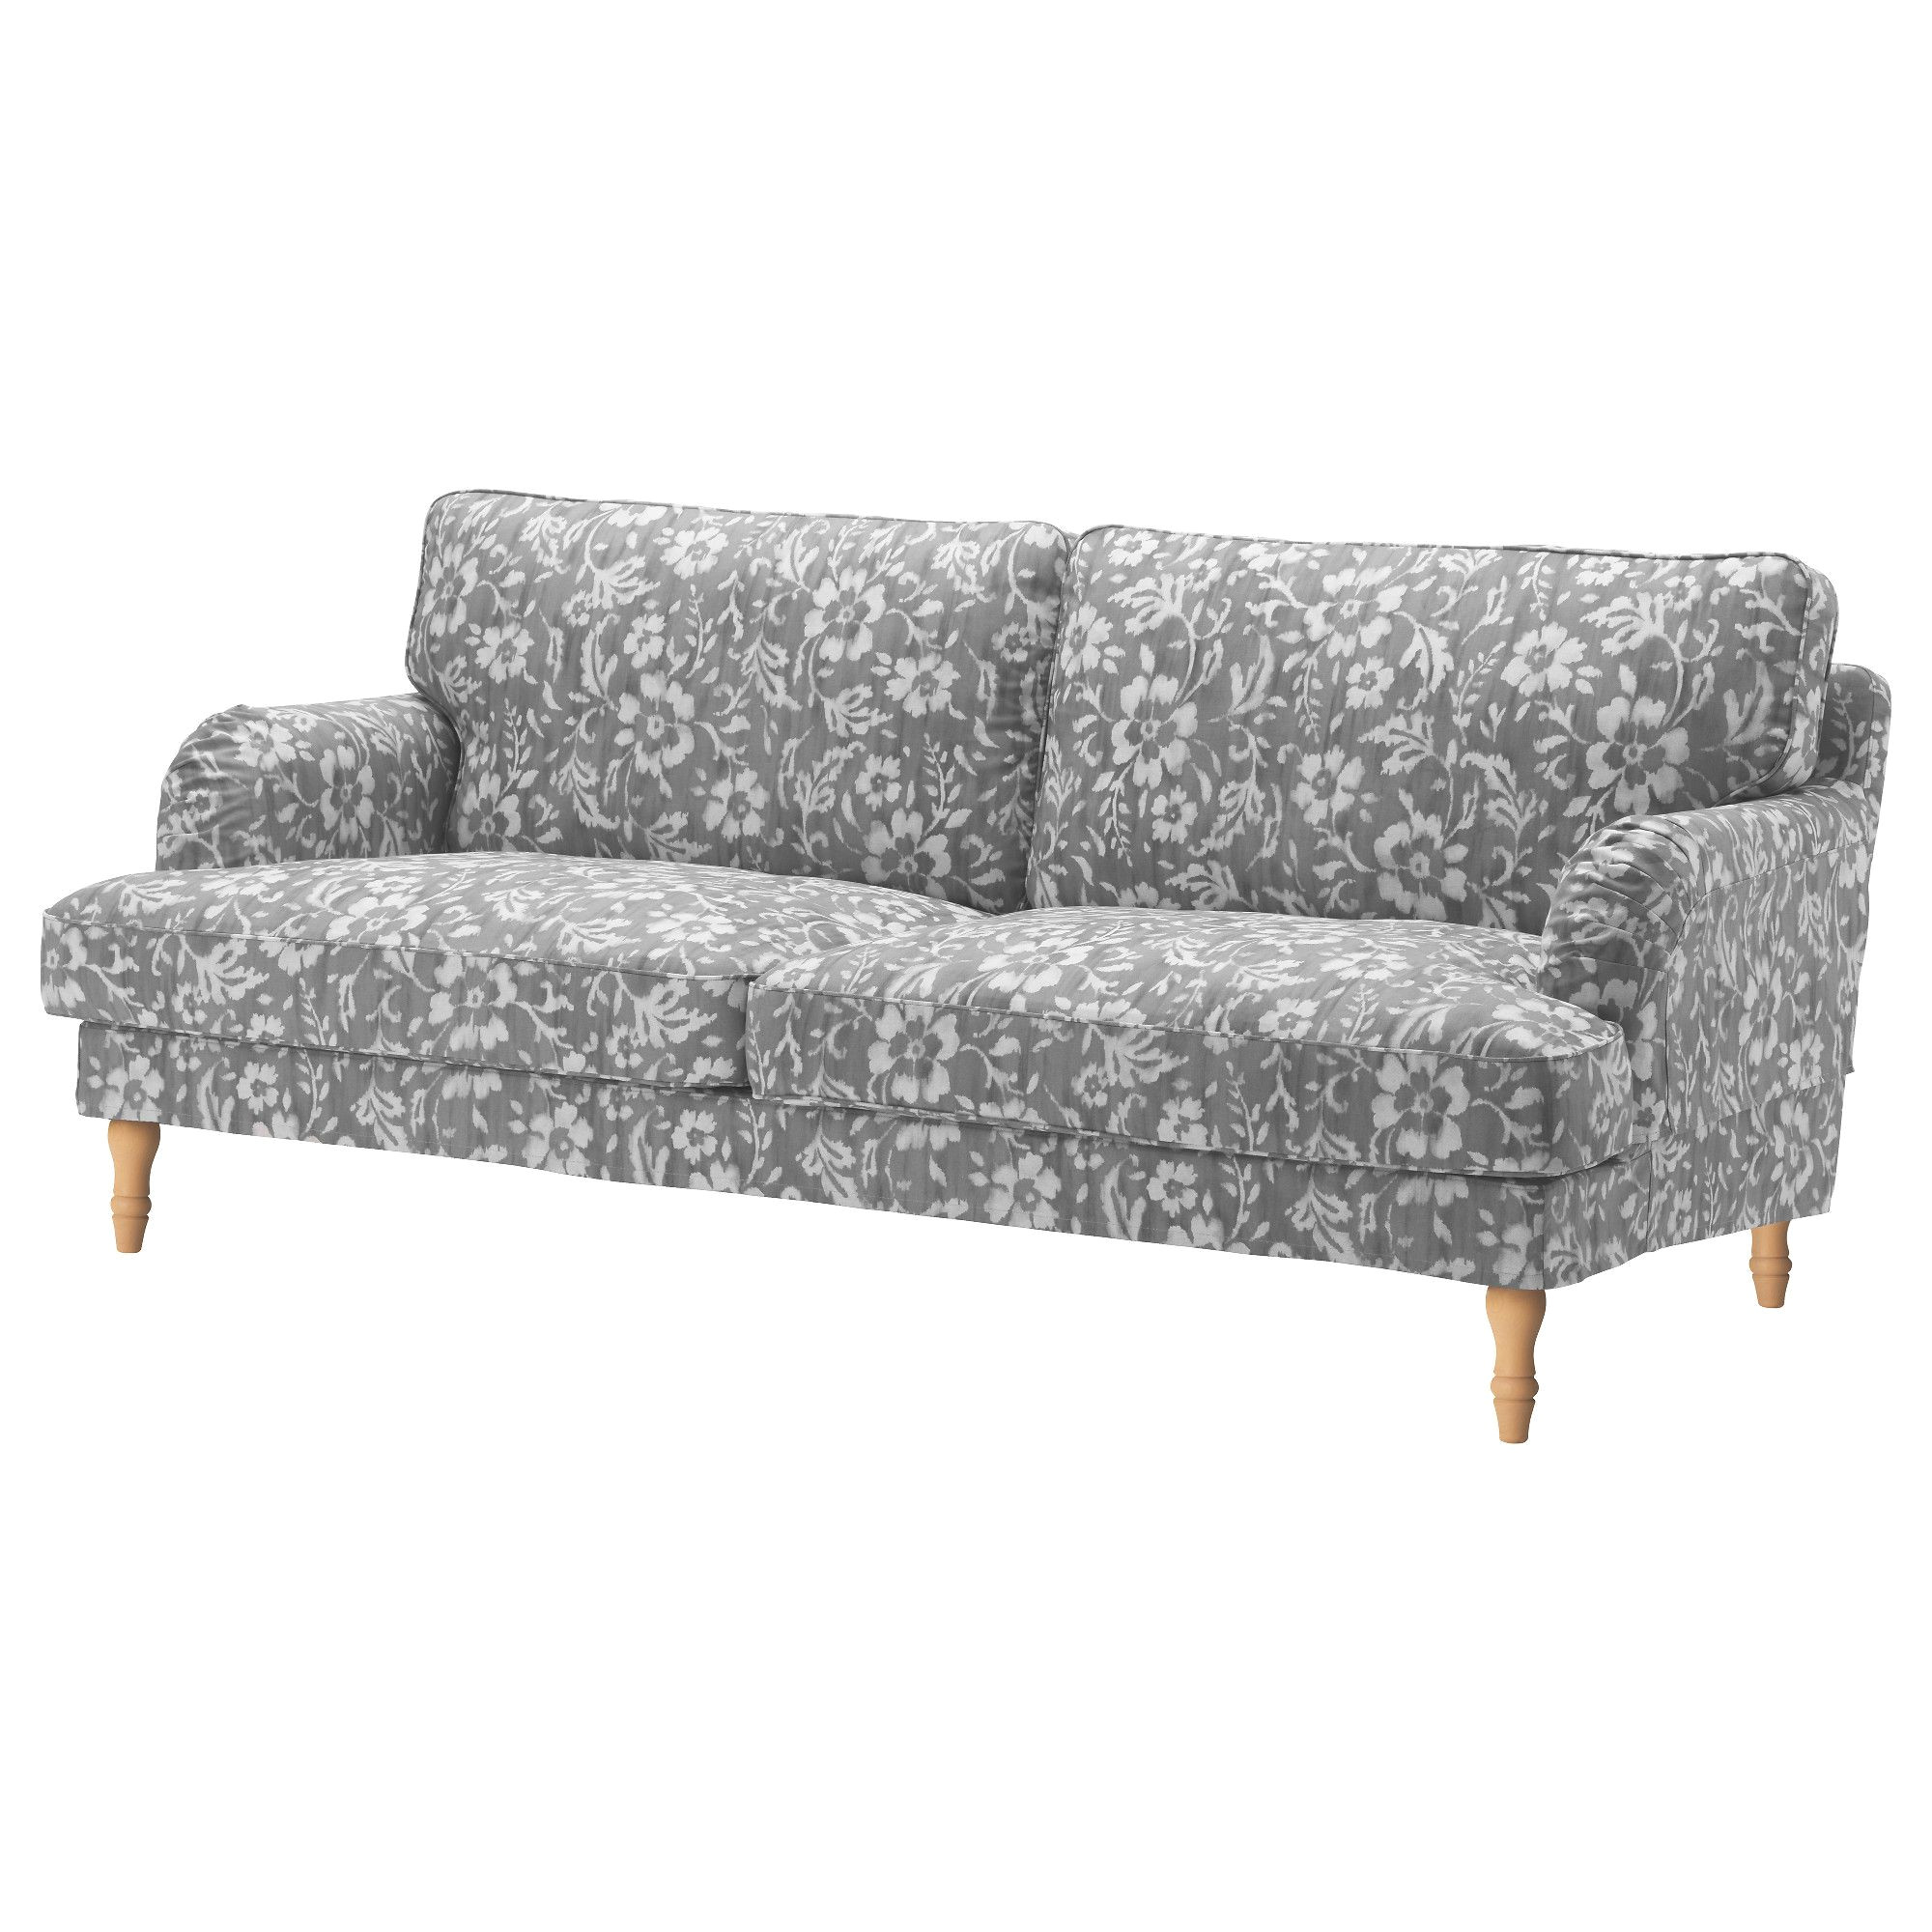 sit comfortably with fabric sofas that are easy to maintain and clean shop fabric sofas and sofa sets in many colours and styles